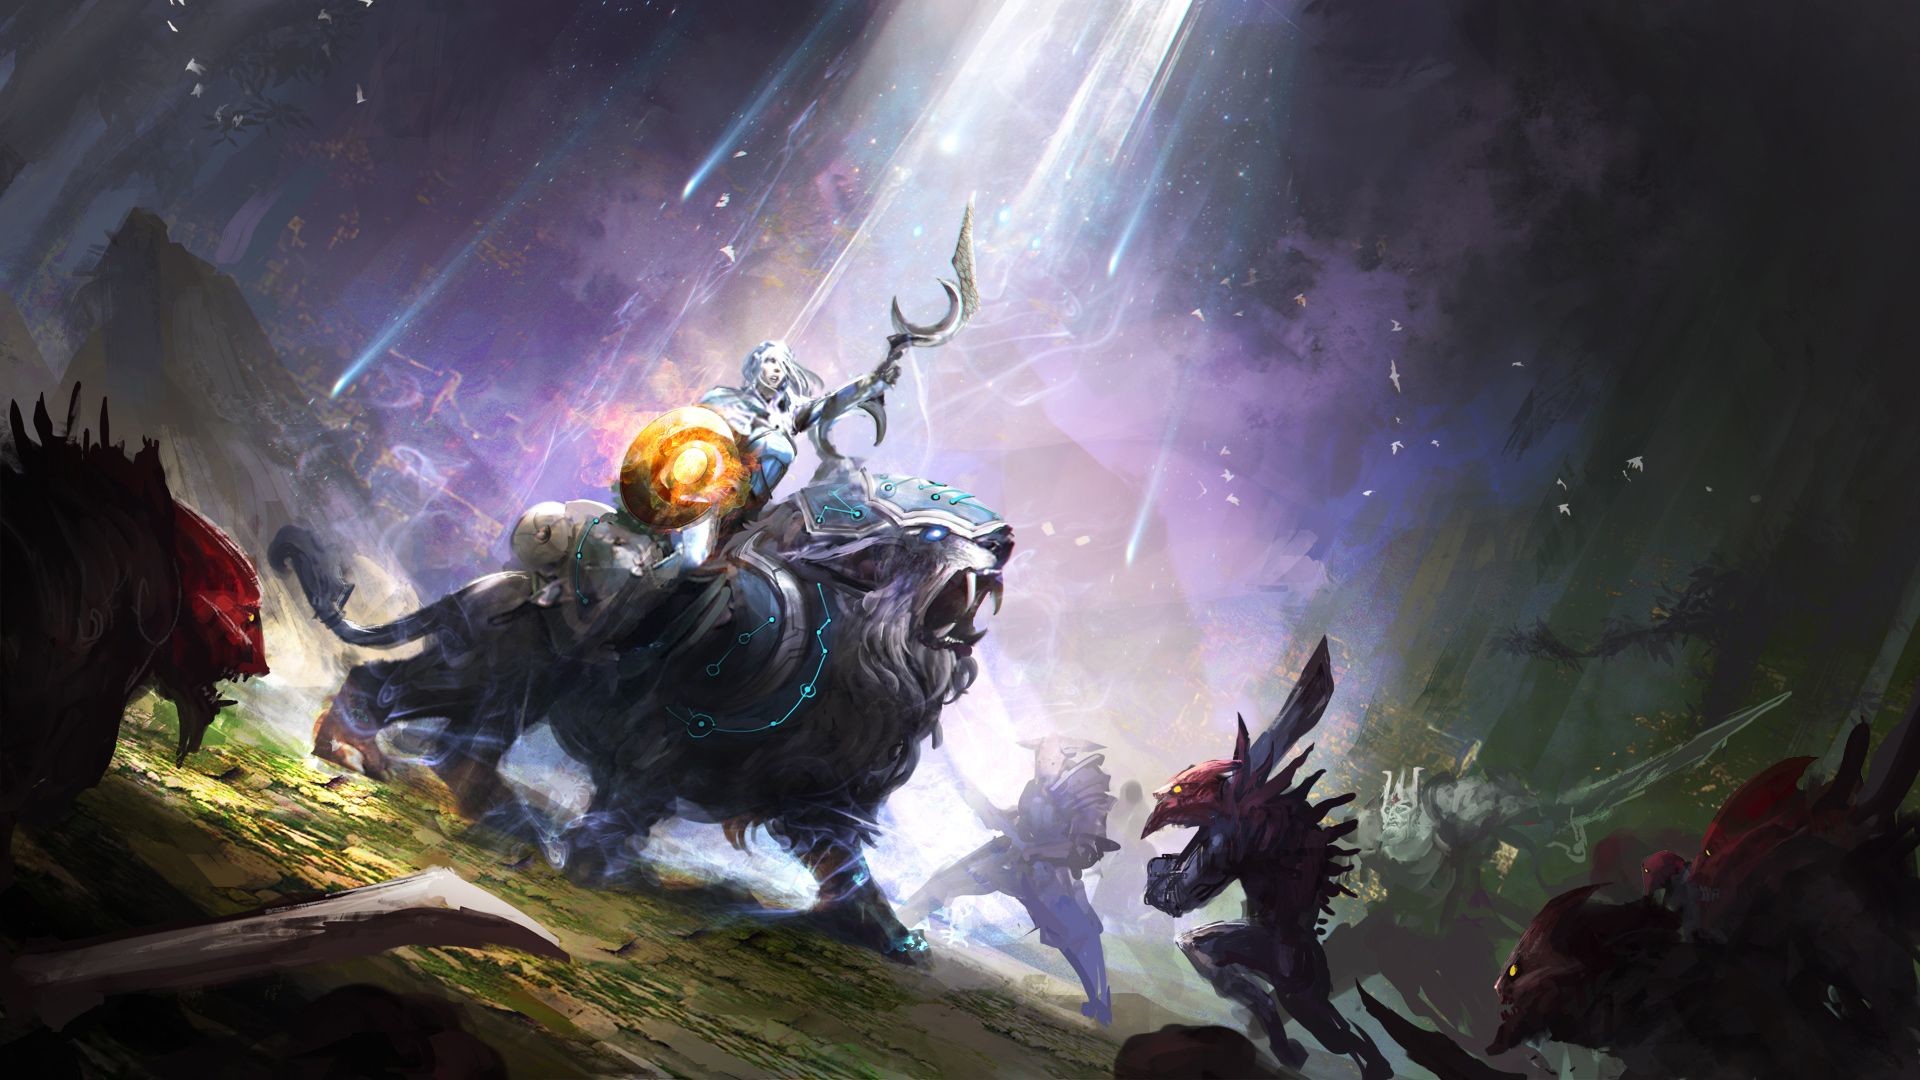 1920x1080 Game Dota 2 Luna Moon Rider Game Dota 2 Luna Moon Rider is an HD desktop  wallpaper posted in our free image collection of gaming wallpapers.